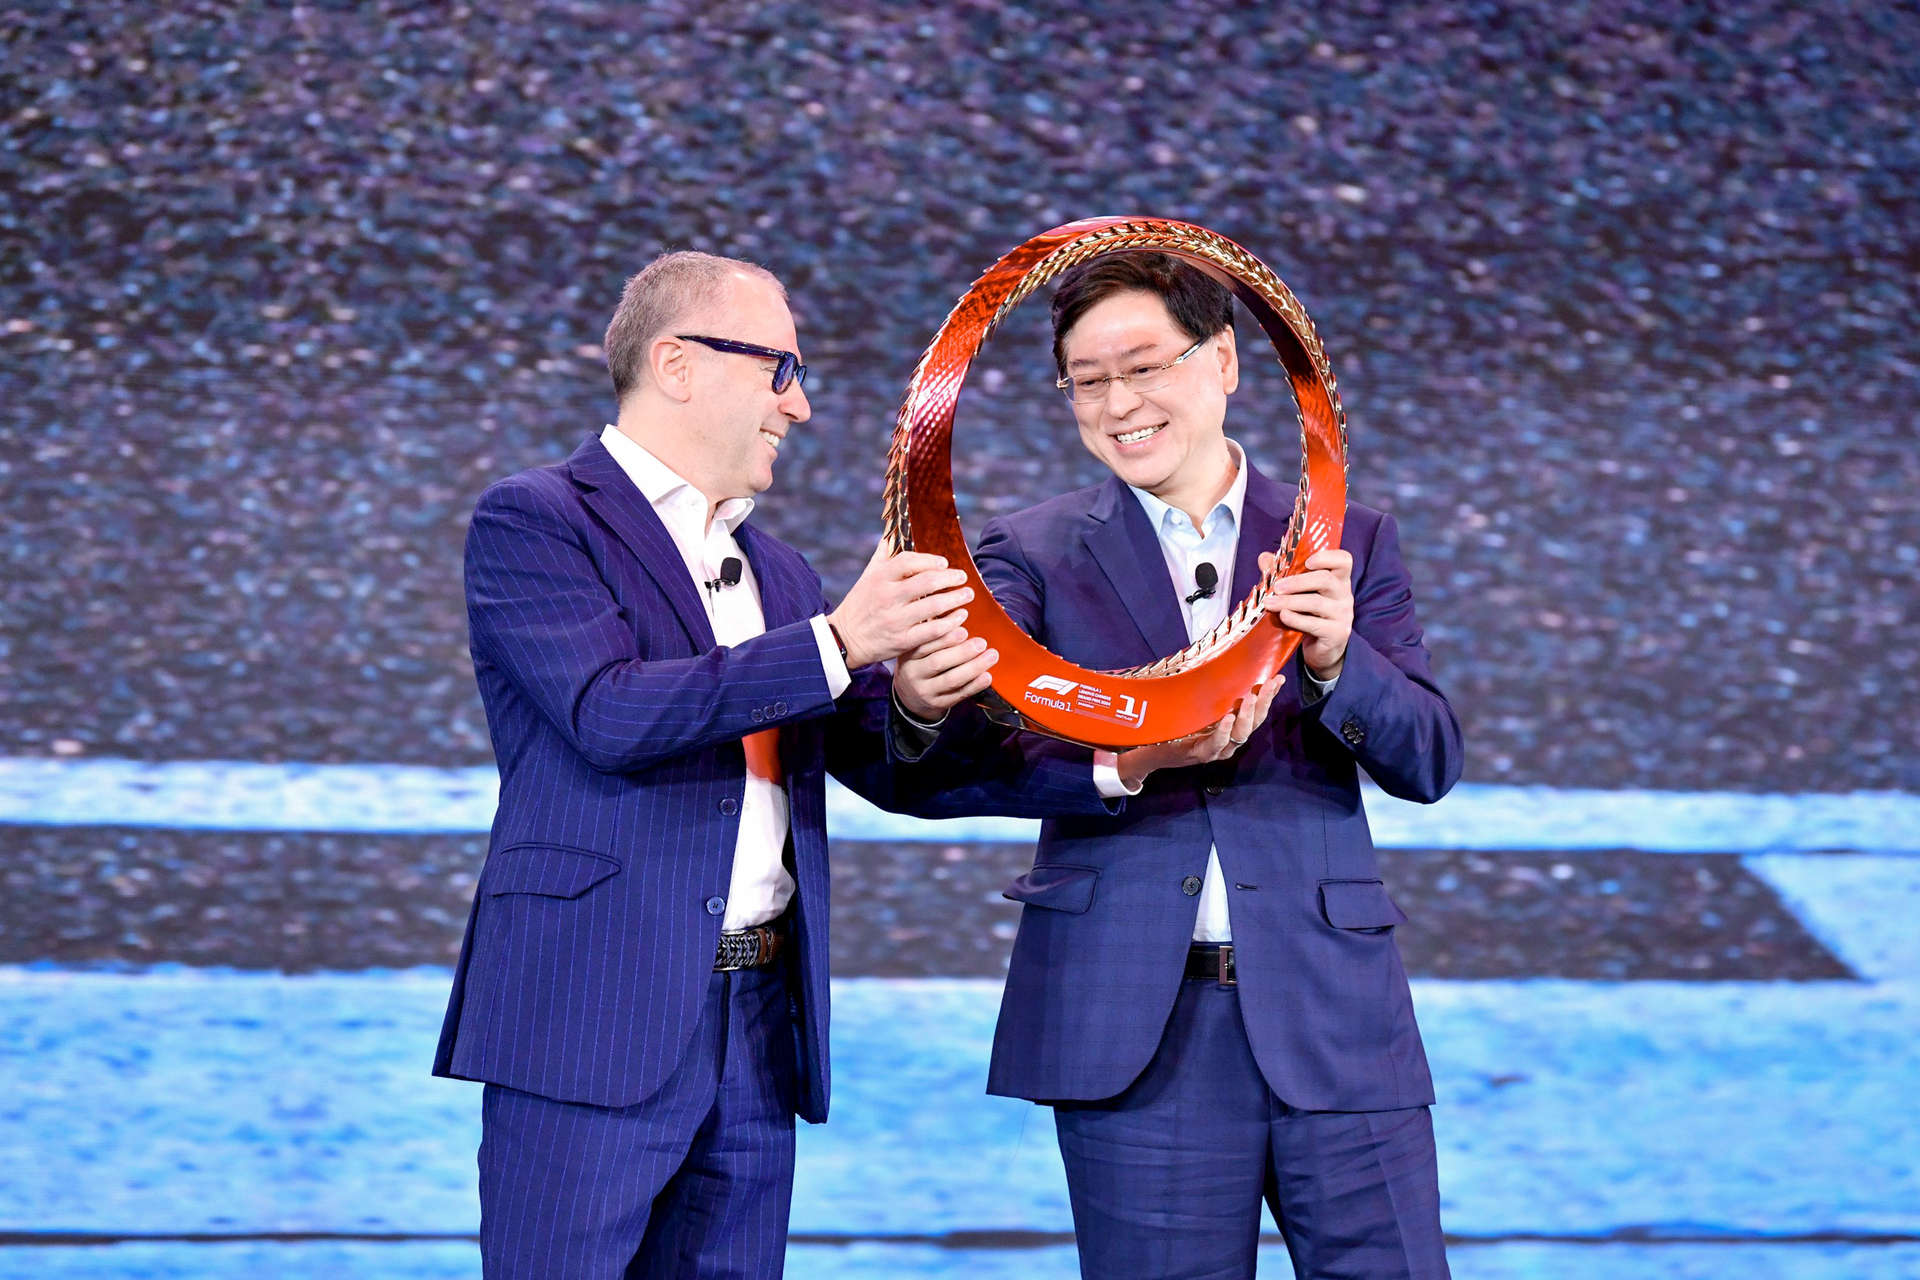 Yuanqing Yang and Formula One CEO Stefano Domenicali on stage at Tech World Shanghai